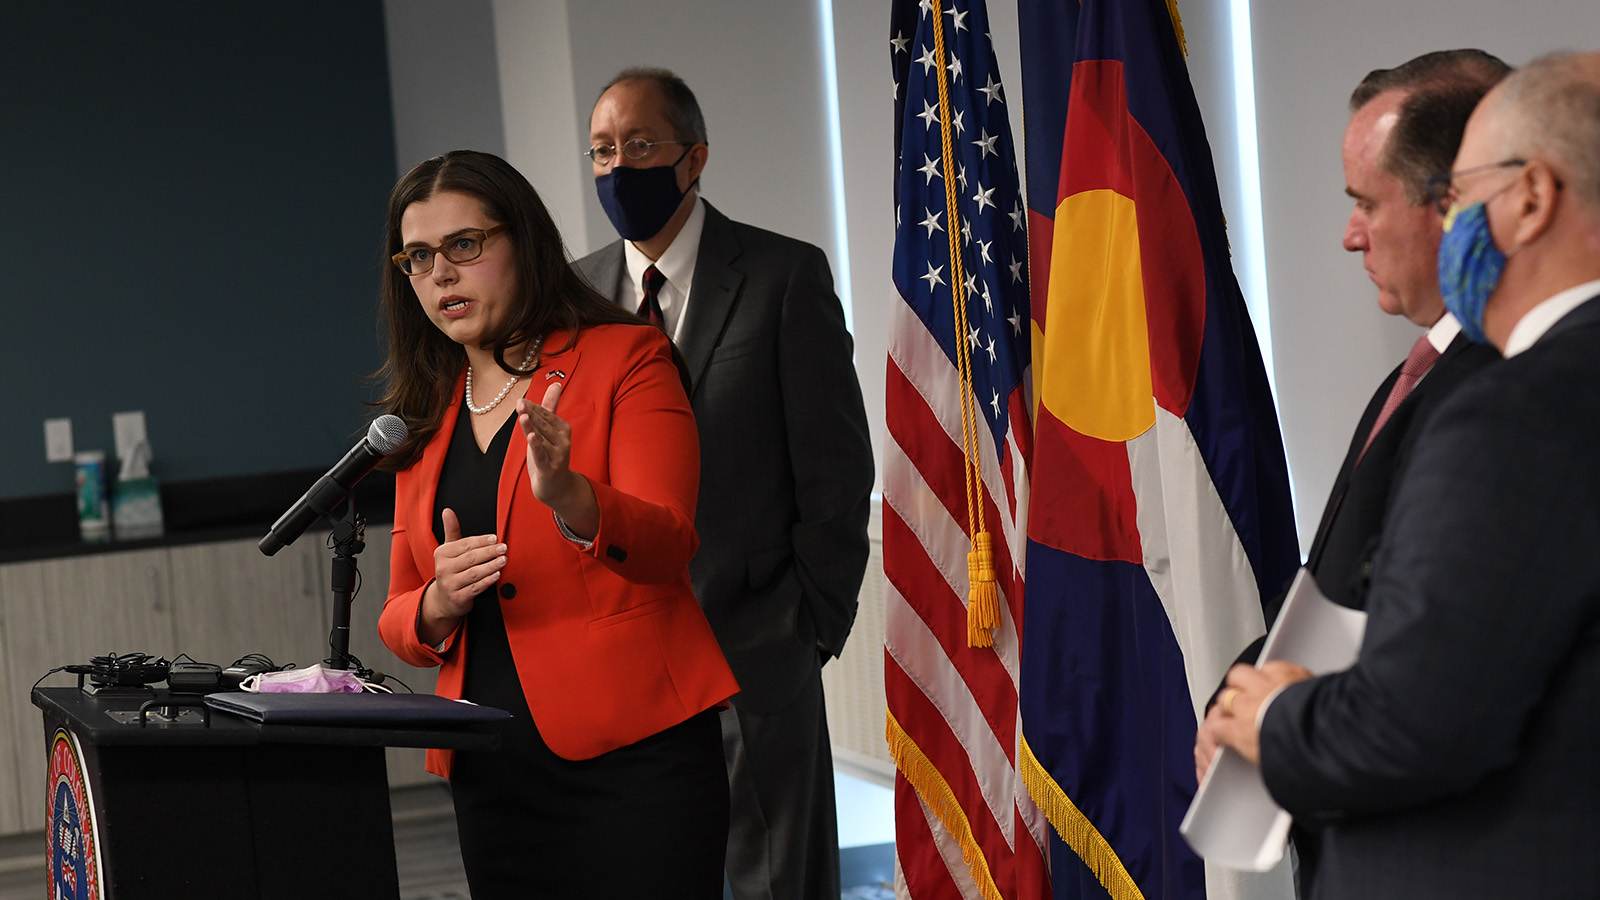 Colorado Secretary of State Jena Griswold speaks during a press conference about to the Mesa County election breach investigation on August 12, 2021 in Denver. From her right is Judd Choate, Colorado State Election Director, Matt Crane, Executive Director of Colorado County Clerks Association, and Chris Beall, Colorado Deputy Secretary of State.